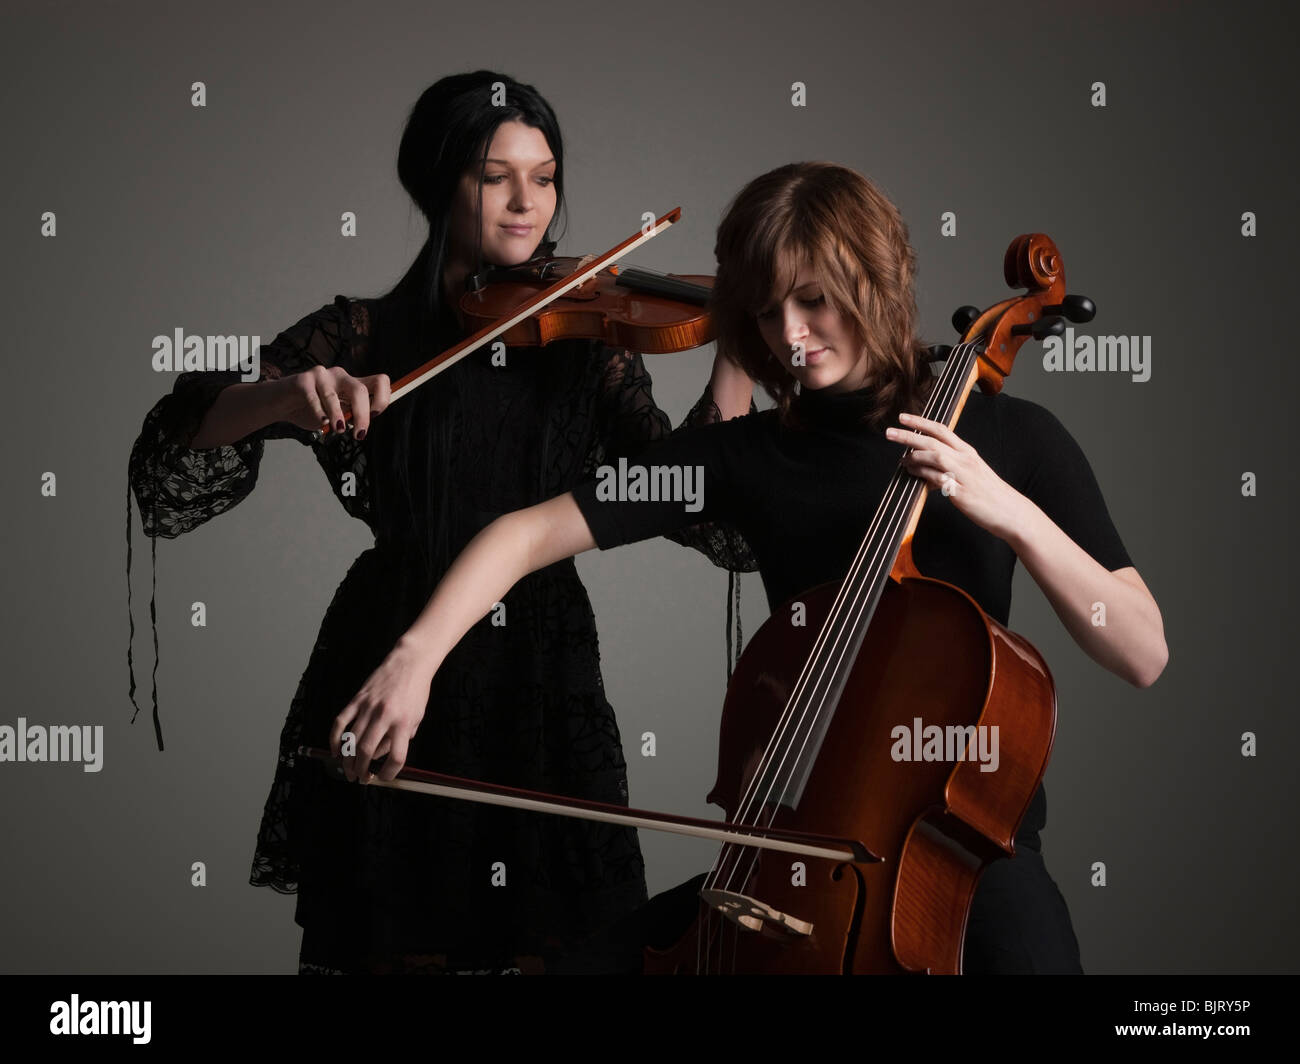 Two young women playing string instruments Stock Photo